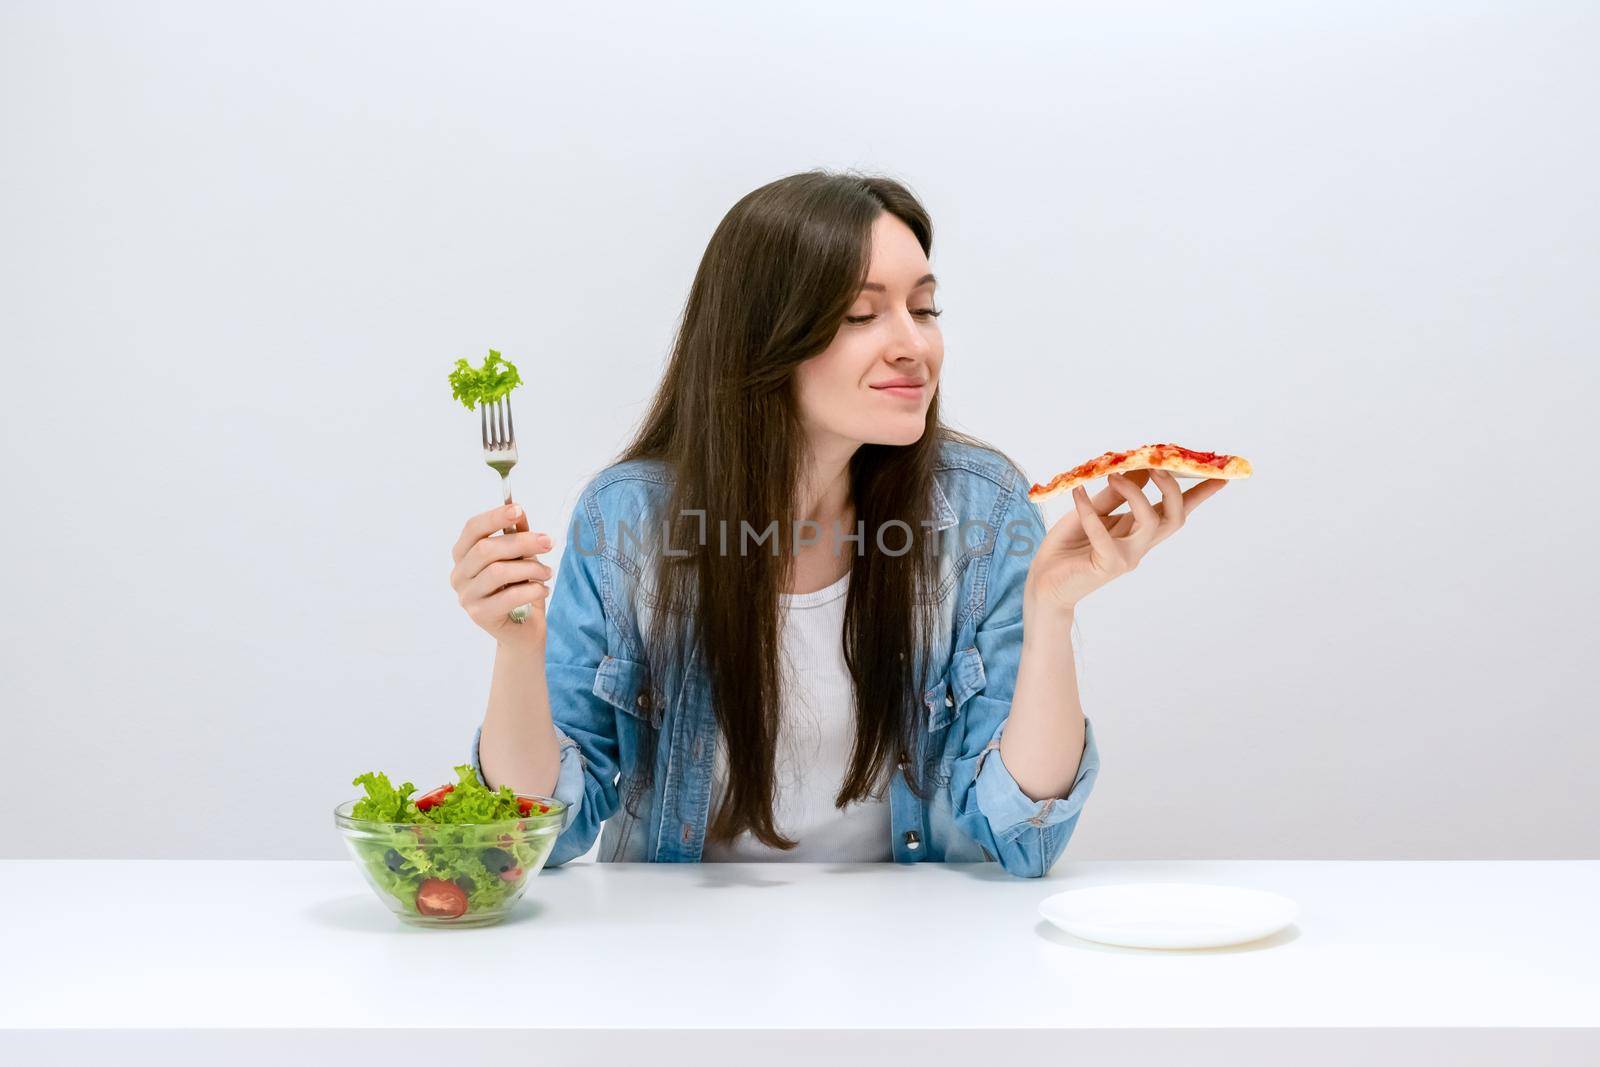 Young beautiful woman on a diet wants to choose pizza instead of salad.